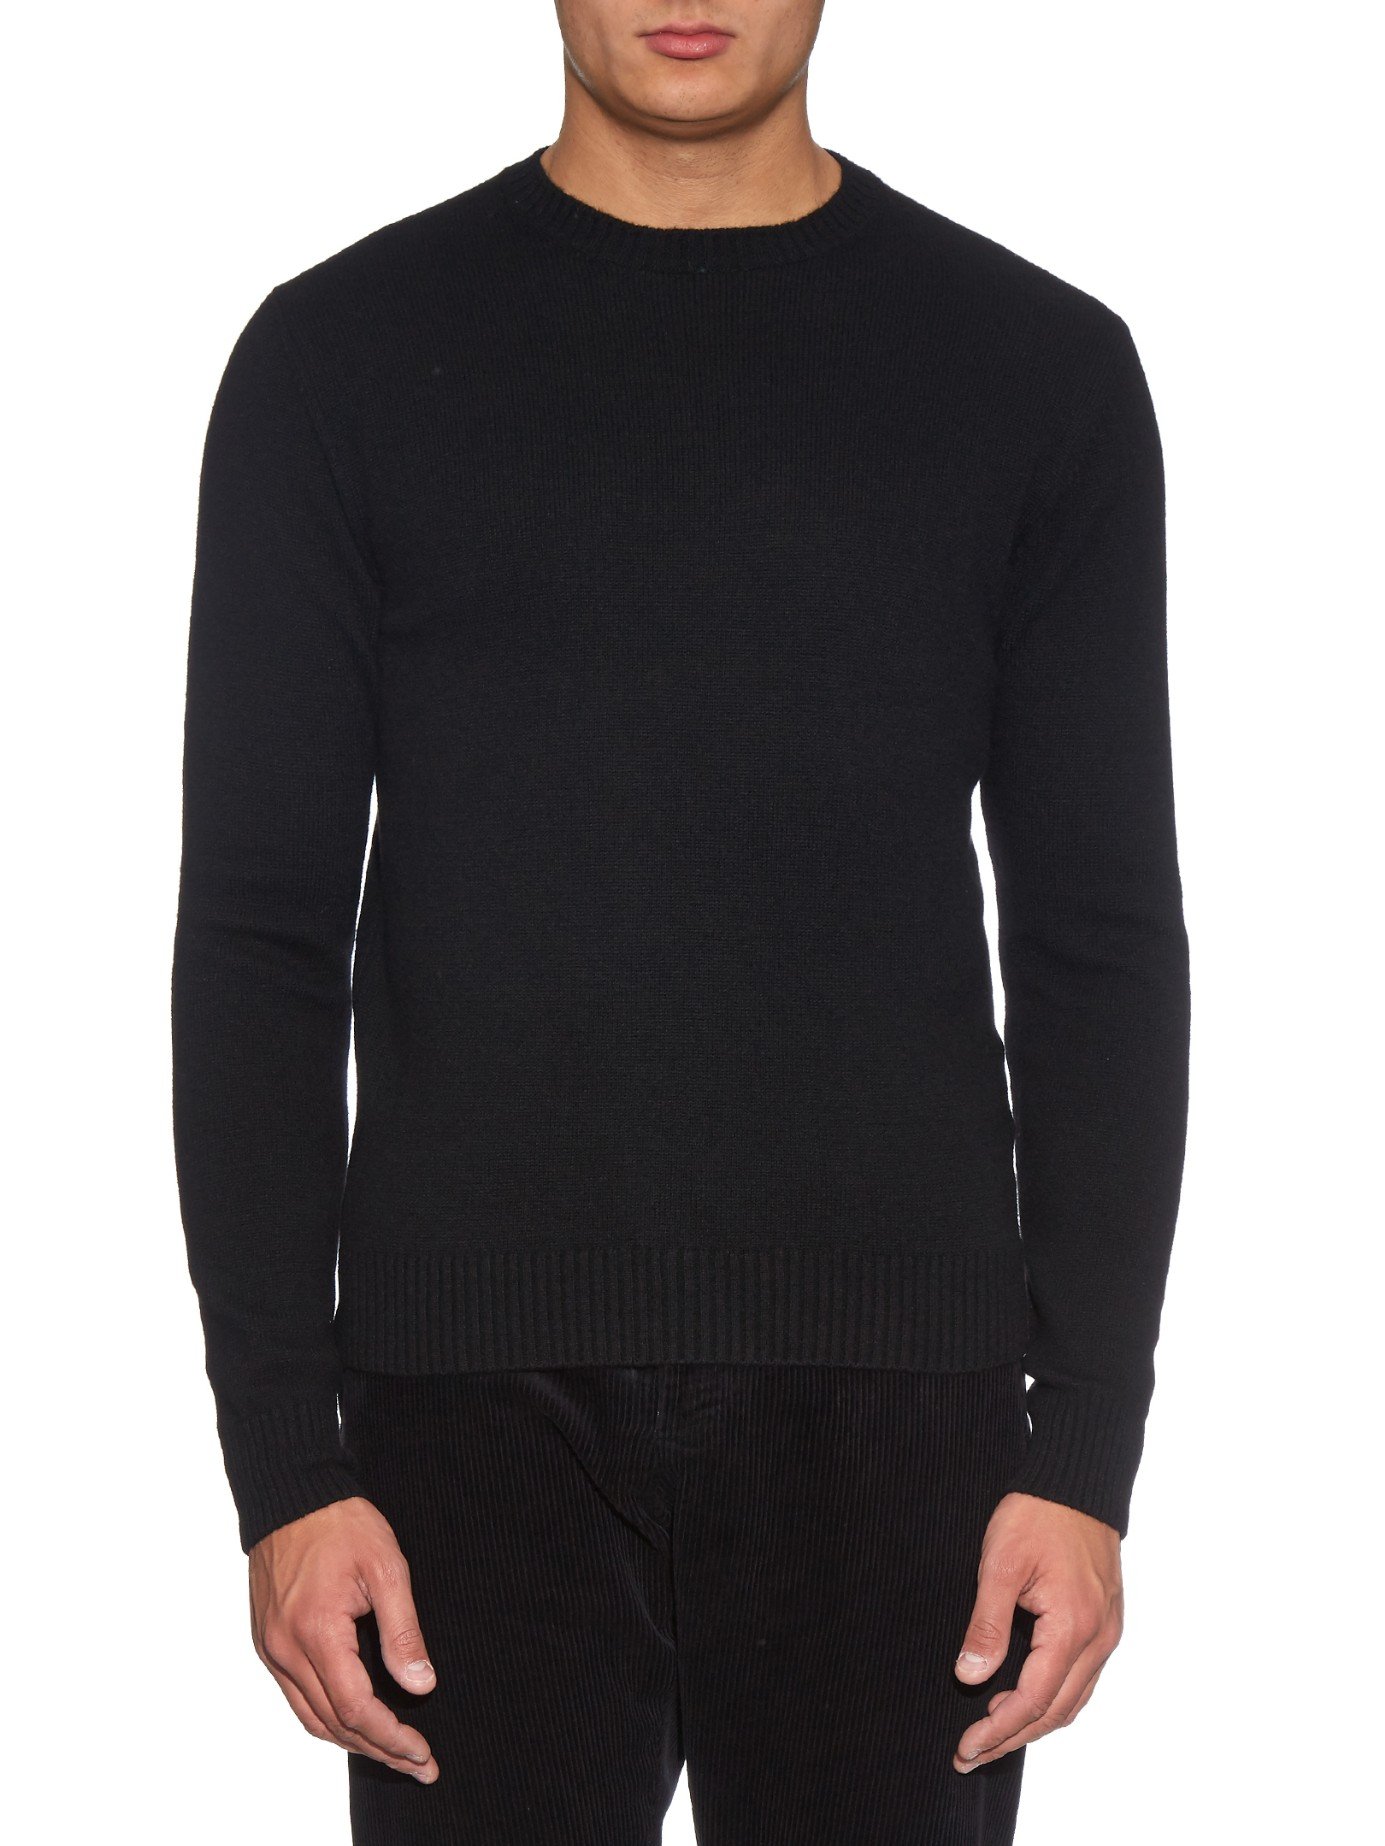 Lyst - Ami Crew-neck Wool-knit Sweater in Black for Men